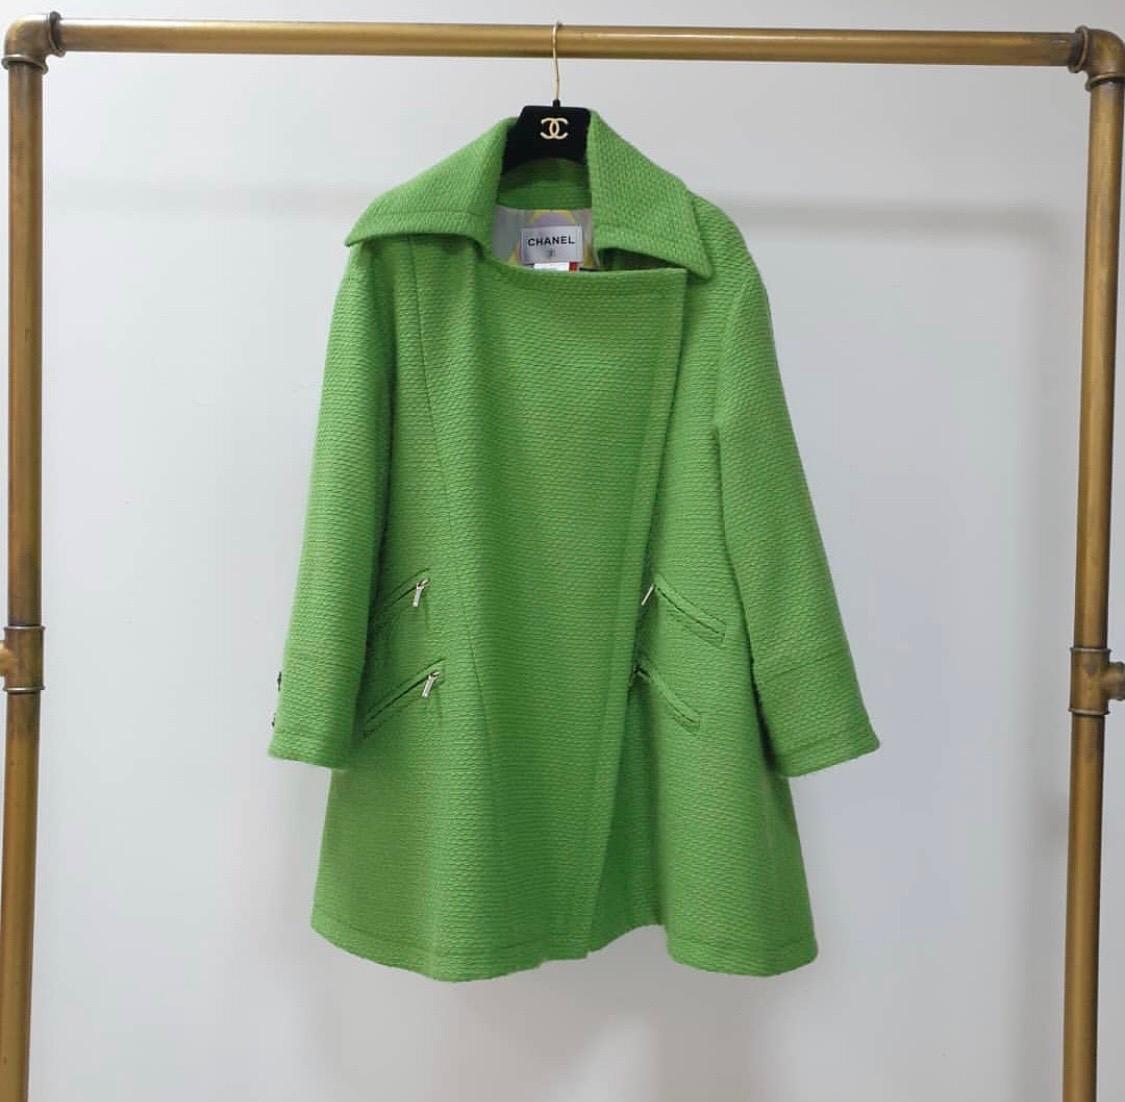 From Supermarket Runway

Total length-84 cm 
Sleeve length-52 cm (the sleeve a little bit down) 
Armpit to armpit-62 cm

Sz.36

Condition is very good.

For buyers from EU we can provide shipping from Poland. Please demand if you need.